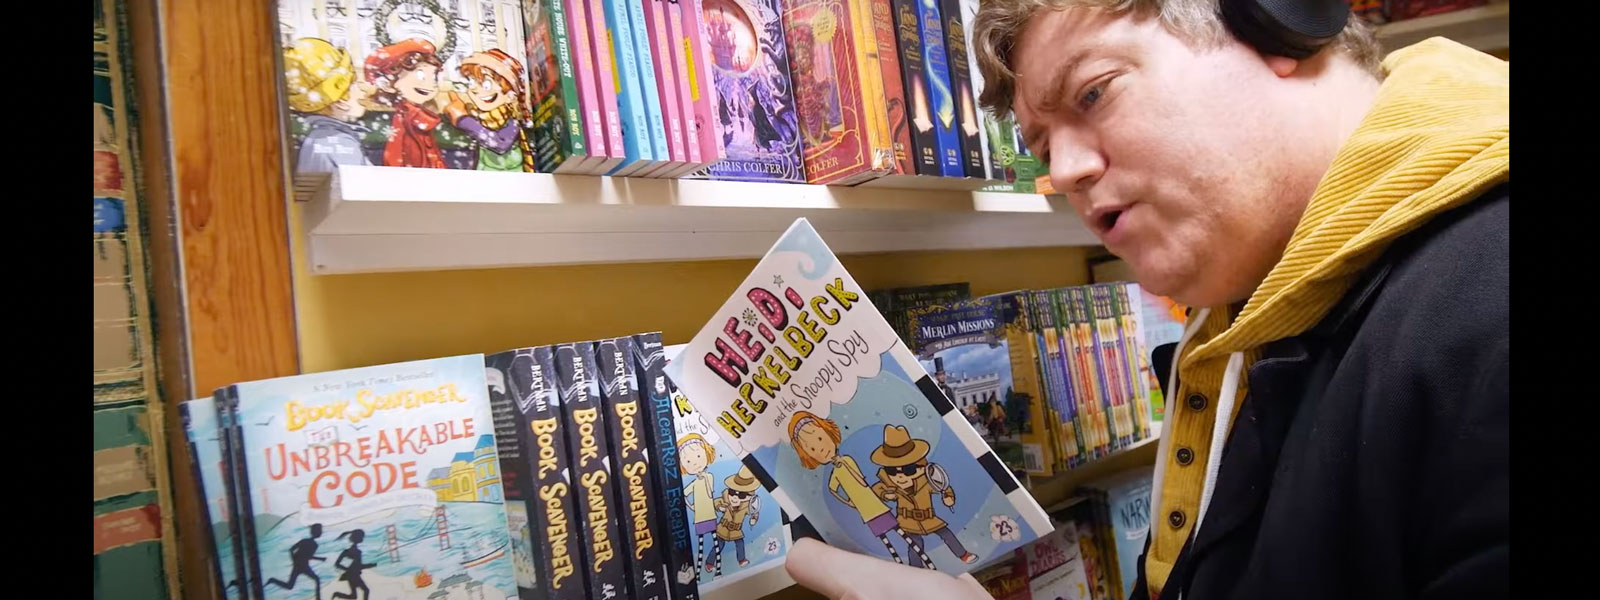 photo of man reading a children's book at a book store